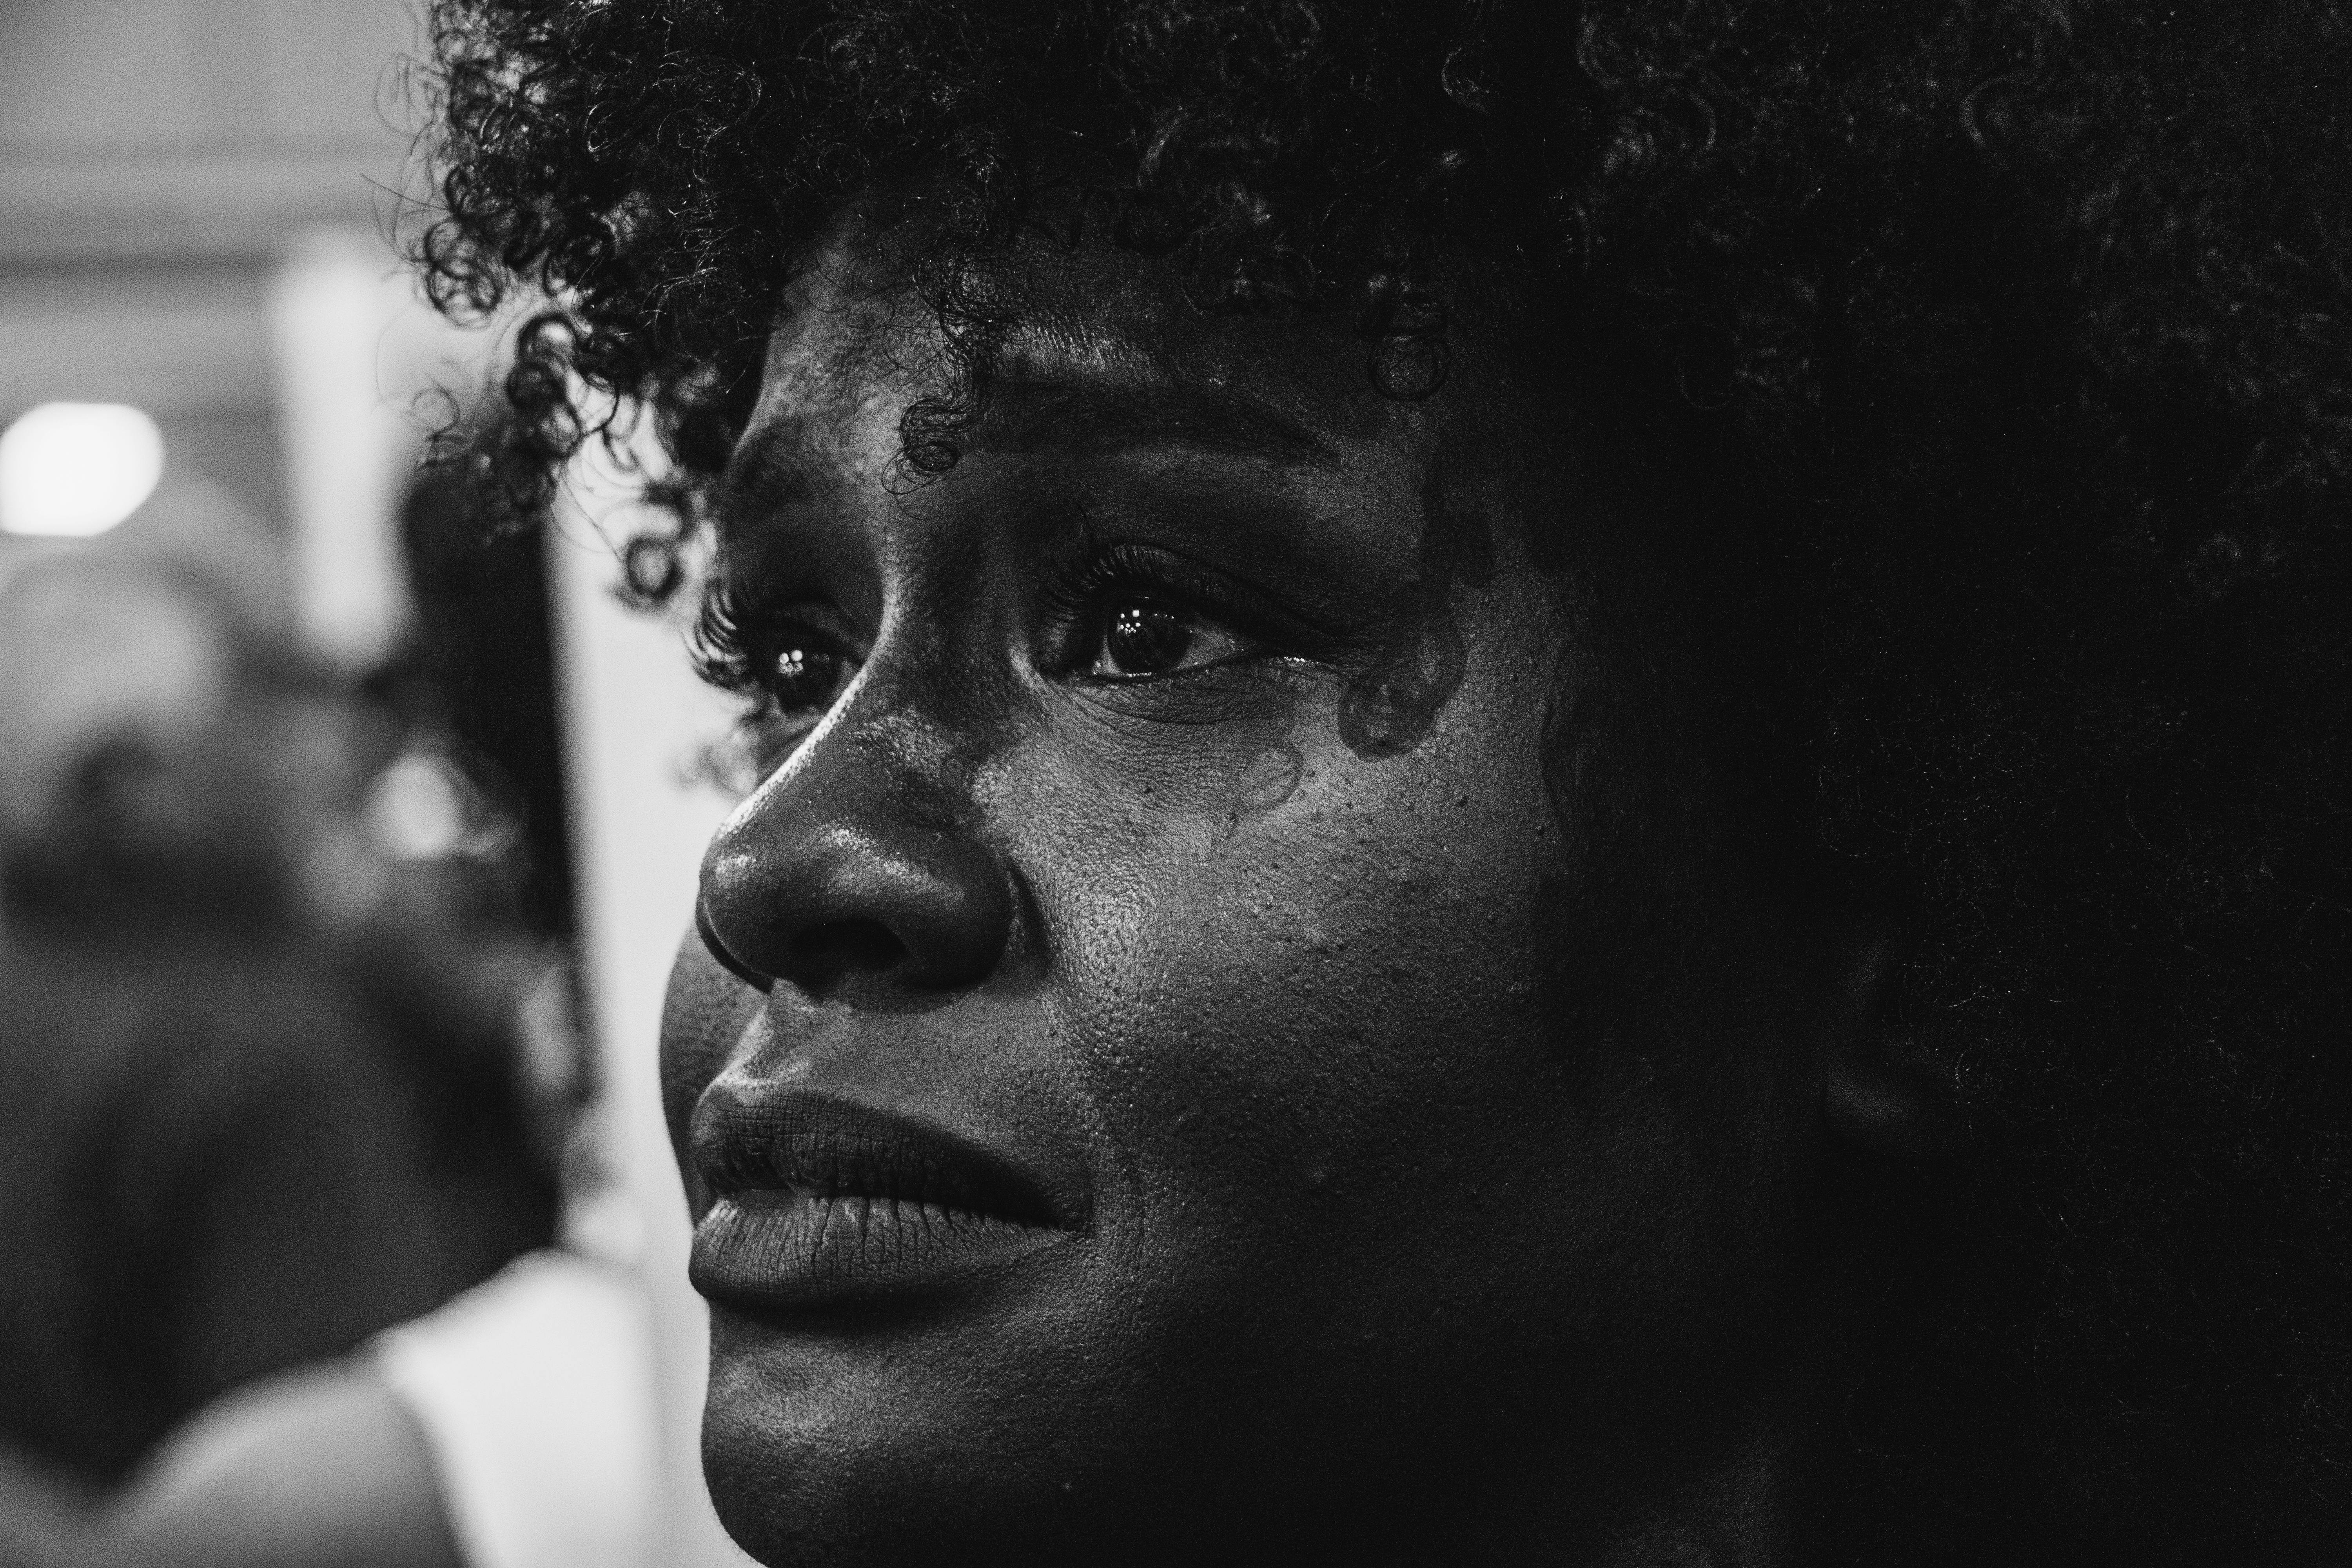 An emotional woman crying | Source: Pexels